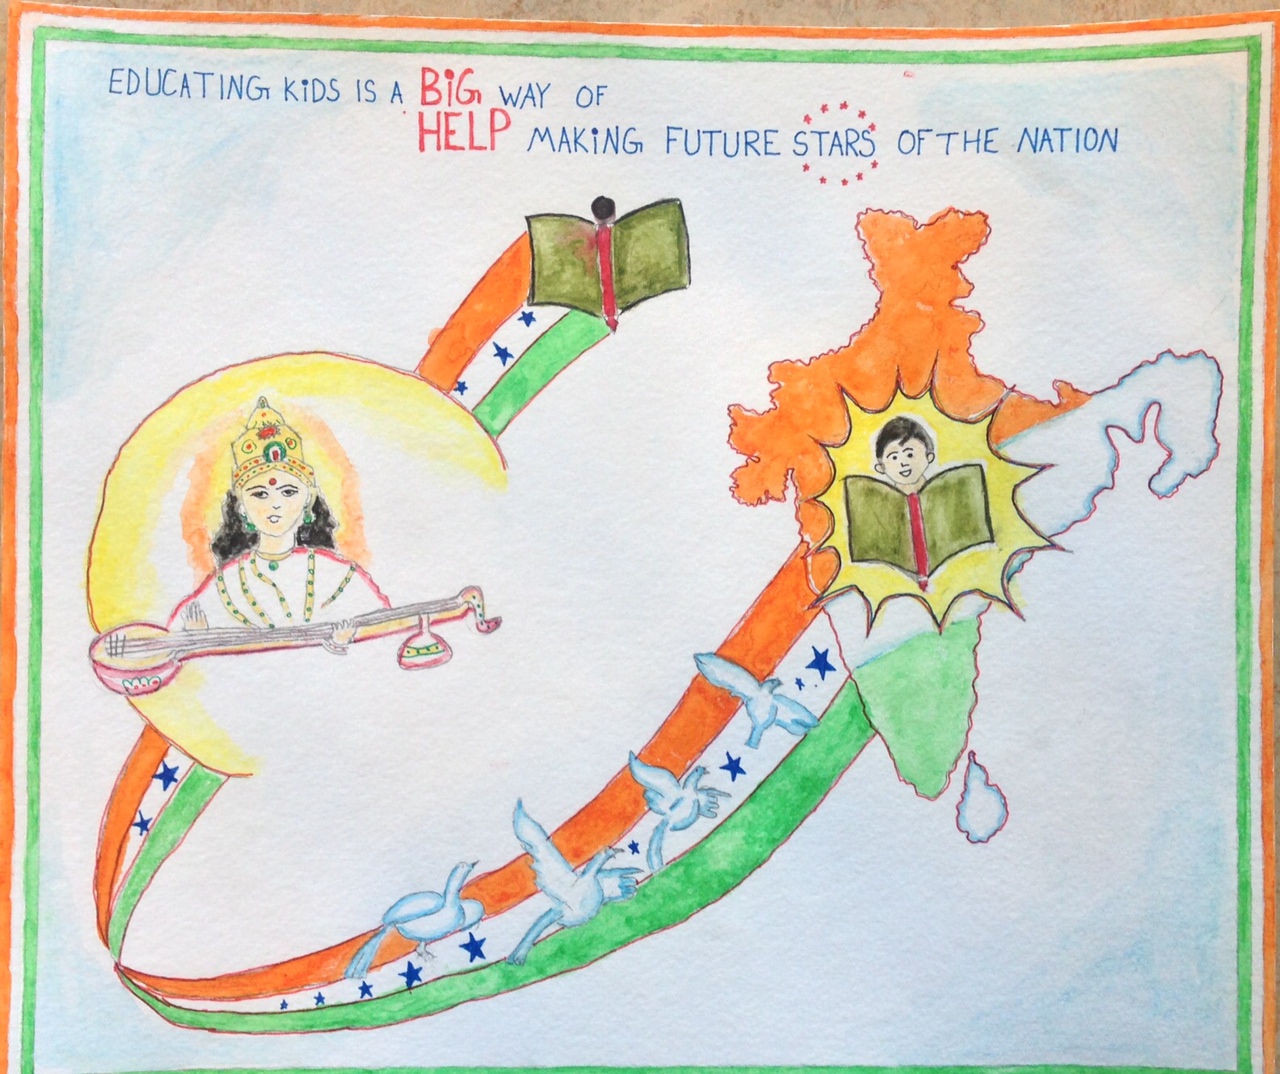 Republic Day Images For Drawing 2019 Yupstory These are overseas indians or people of indian origin, who are out india for study or work. republic day images for drawing 2019